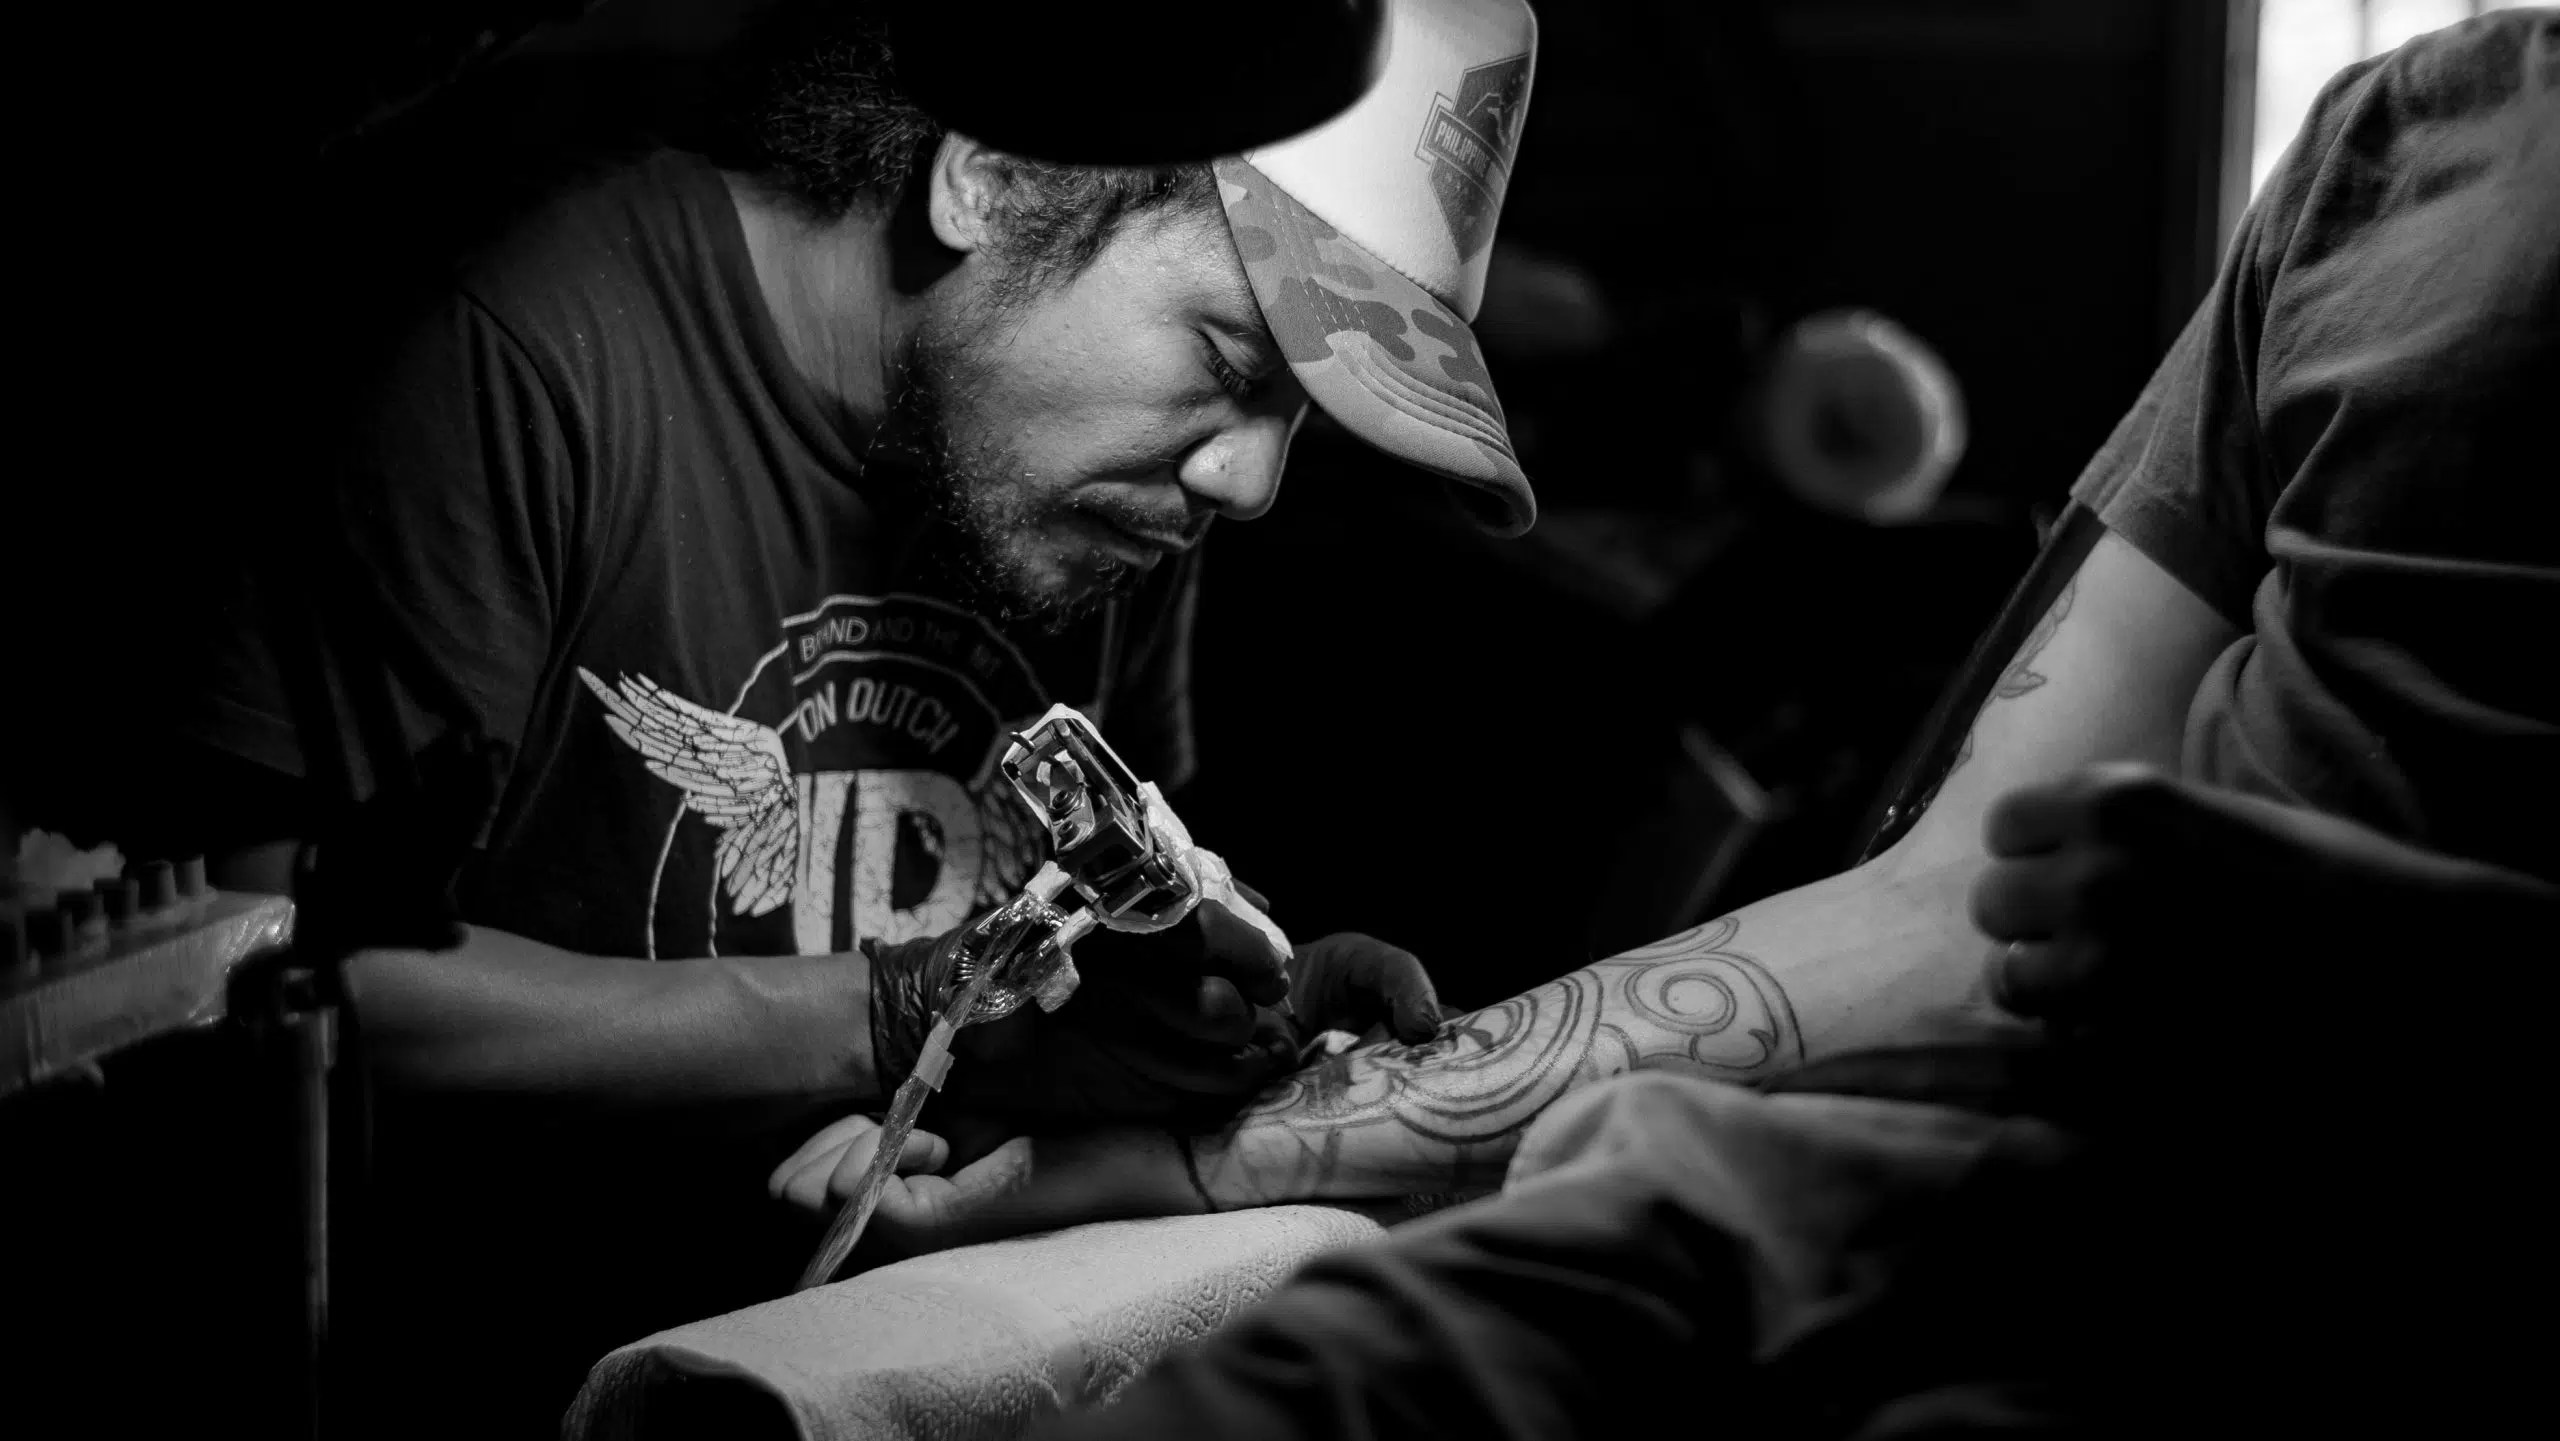 Should Tattoo Artists Be Worried Scientists Just Invented Painless DIY  Permanent Tattoos  Mad Rock 1025